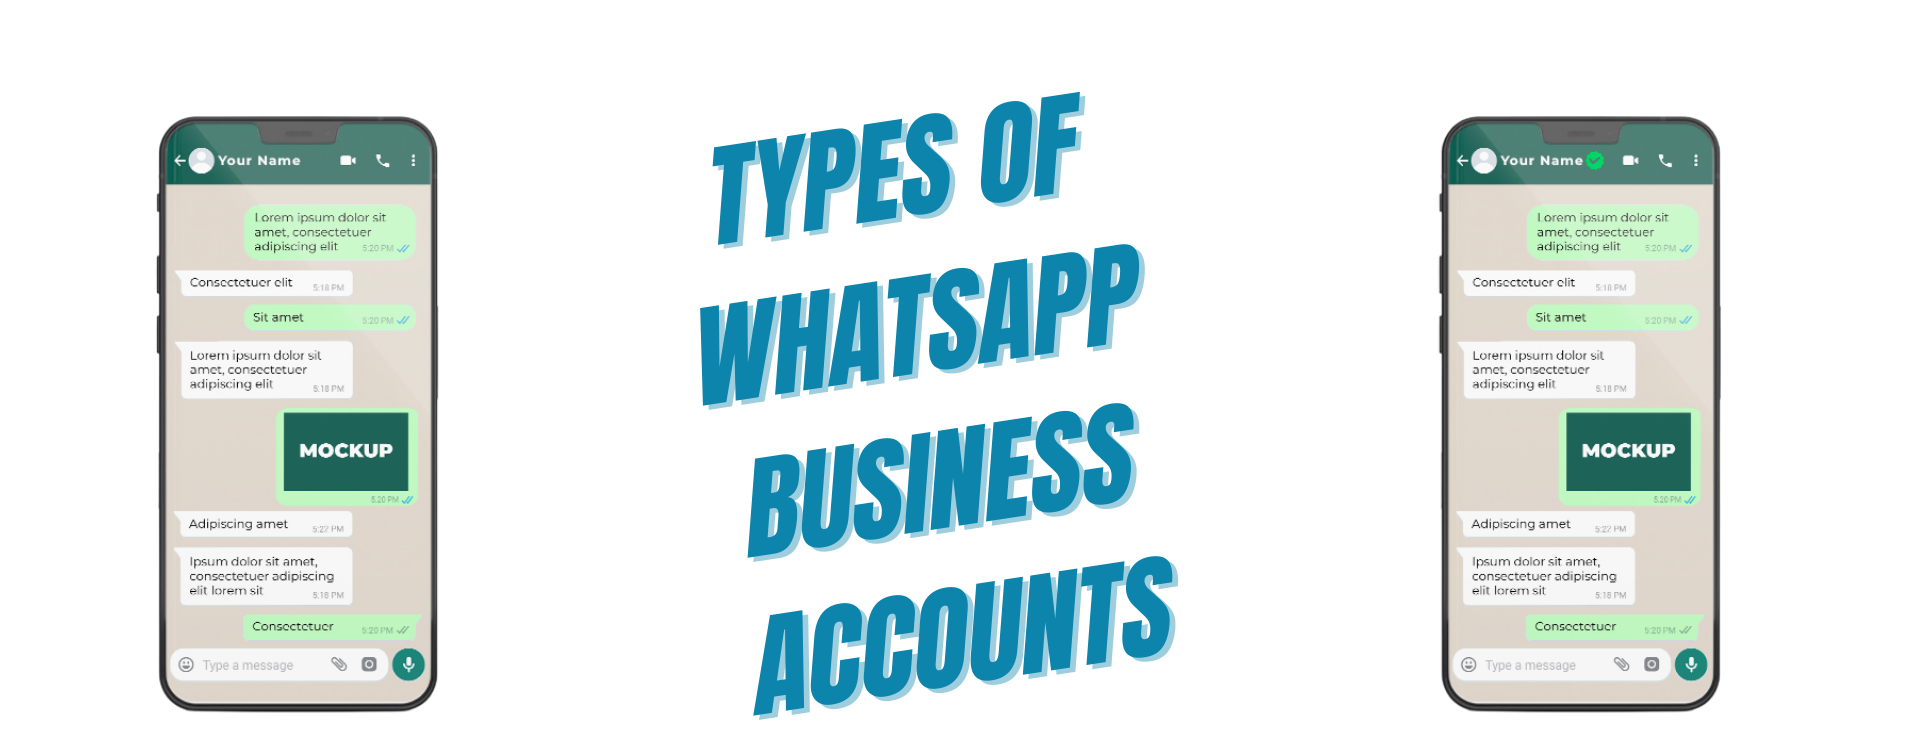 whatsapp business account download